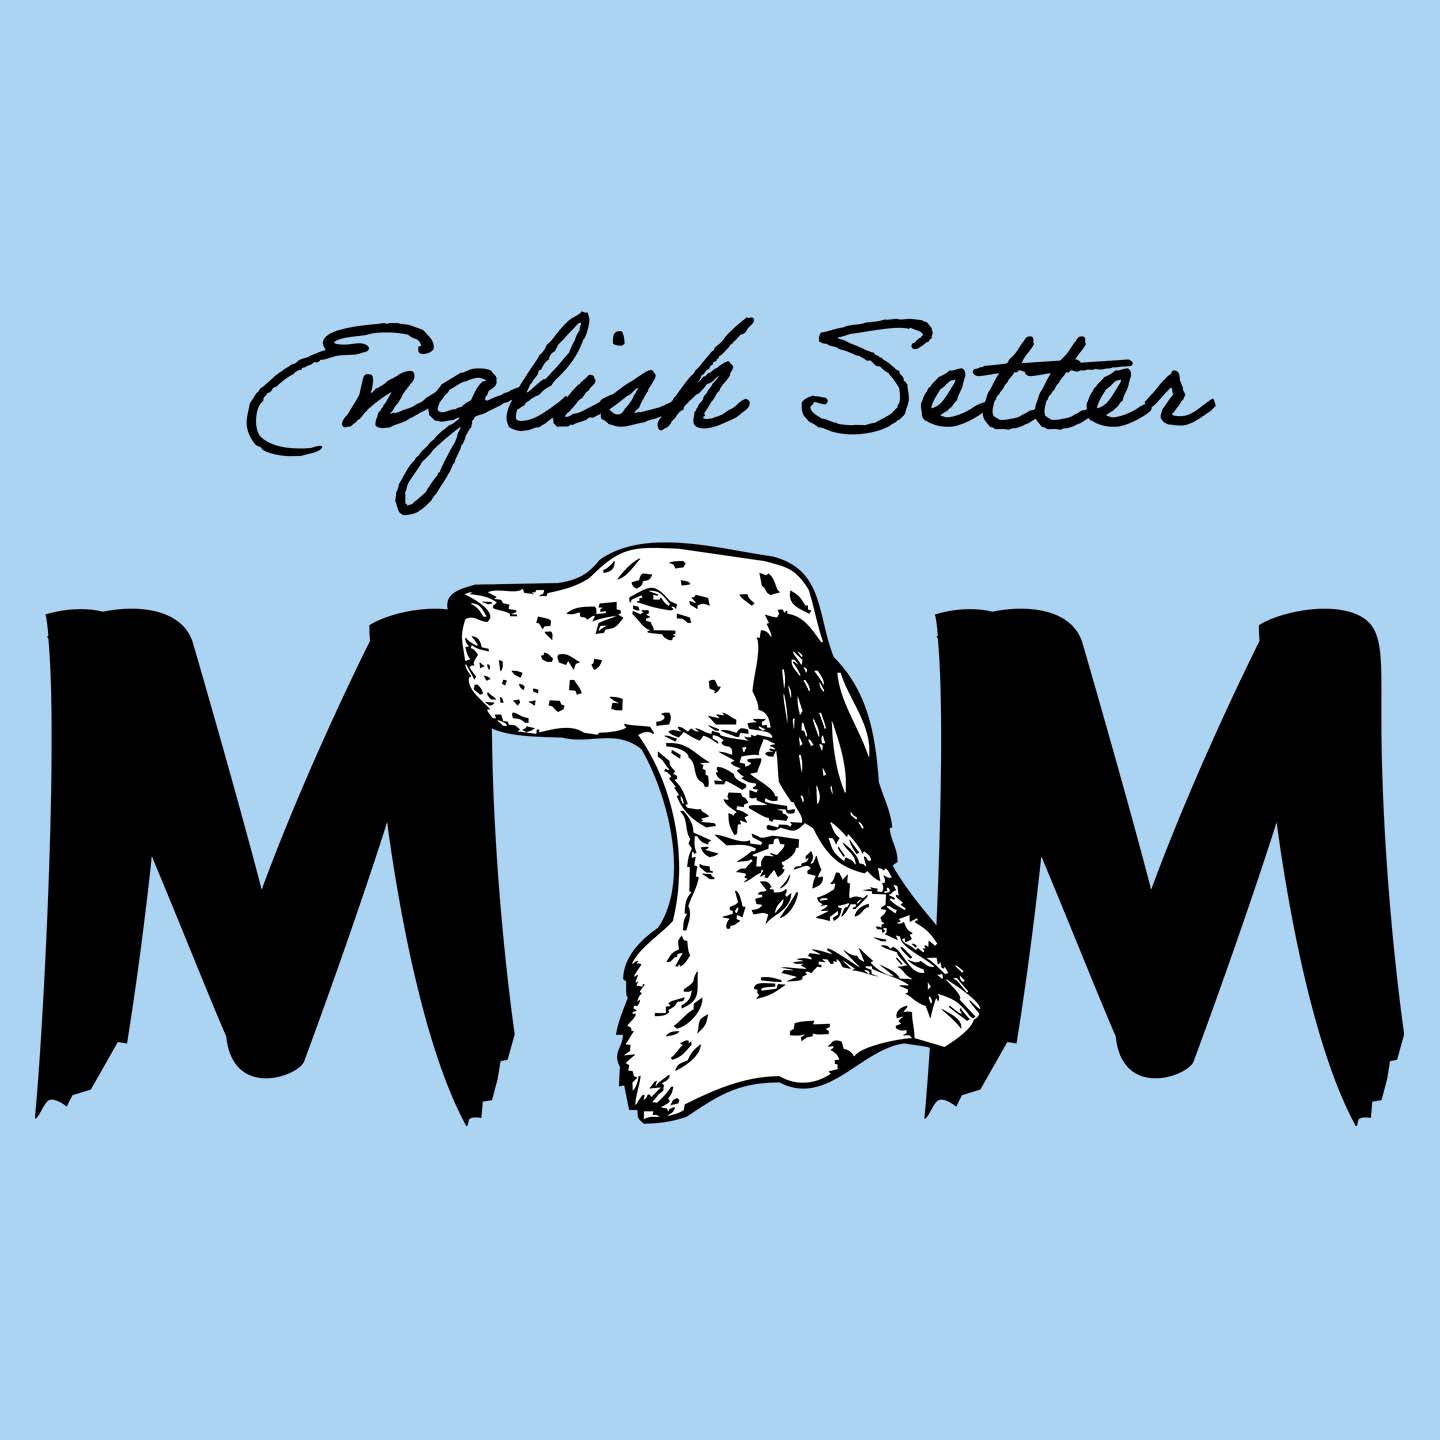 English Setter Breed Mom - Women's Fitted T-Shirt